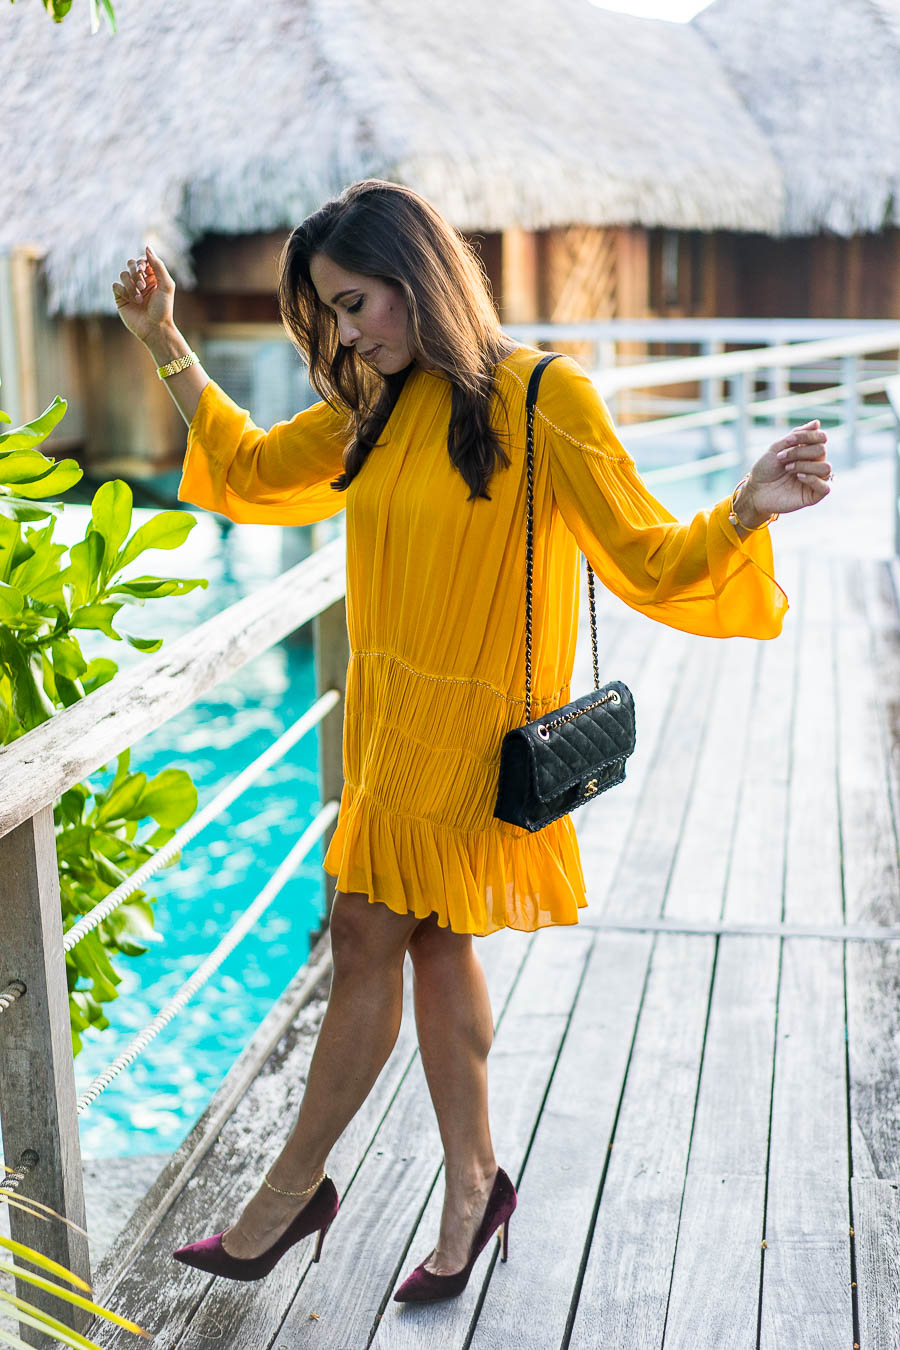 A Glam Lifestyle shares what she wore including this mustard yellow dress on her her honeymoon in Bora Bora